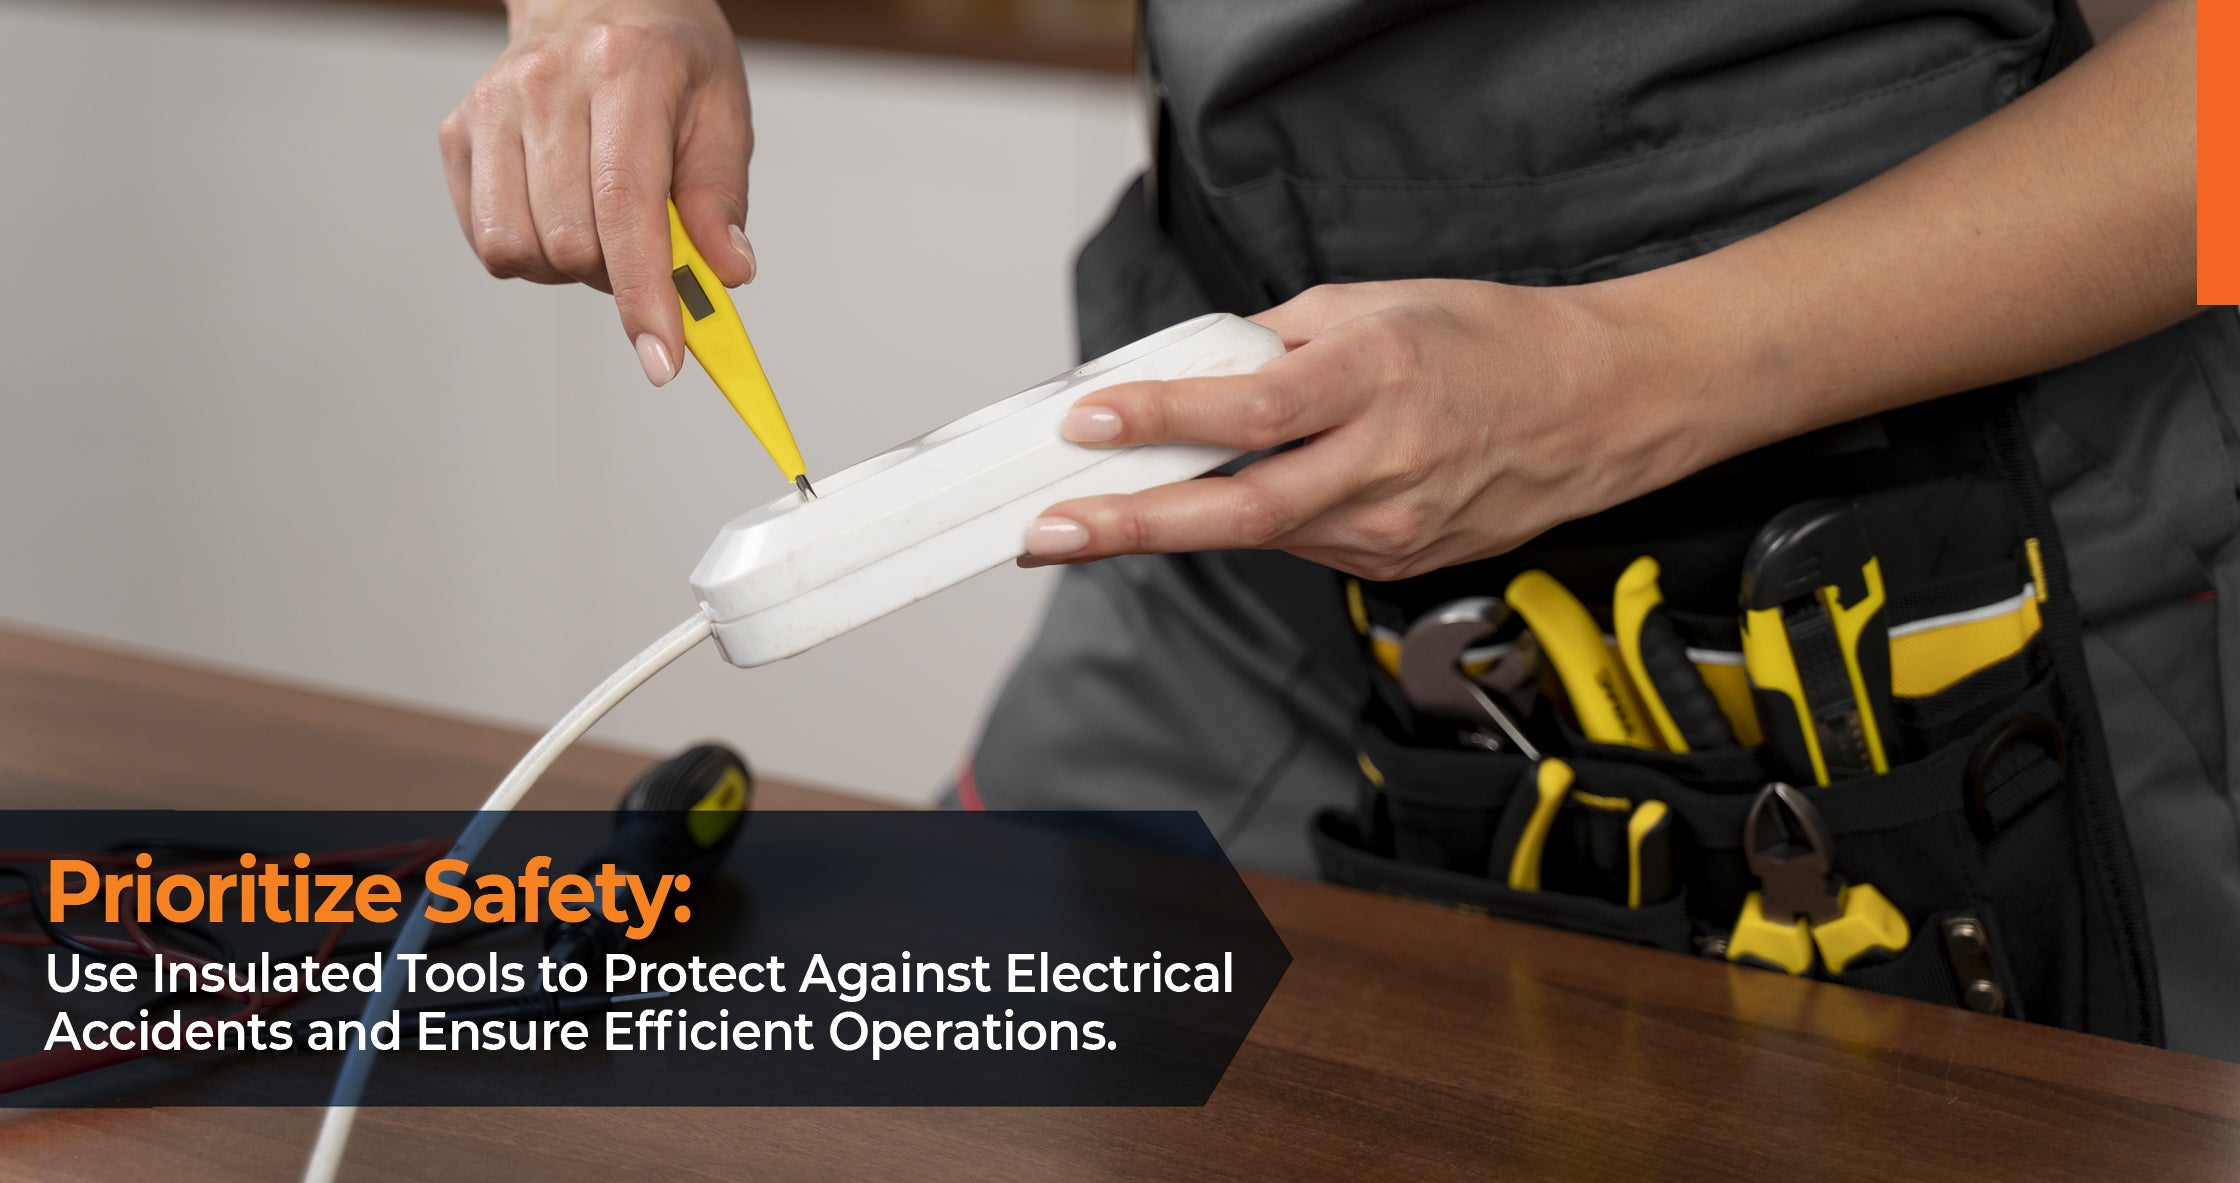 Prioritize Safety: Use Insulated Tools to Protect Against Electrical Accidents and Ensure Efficient Operations.